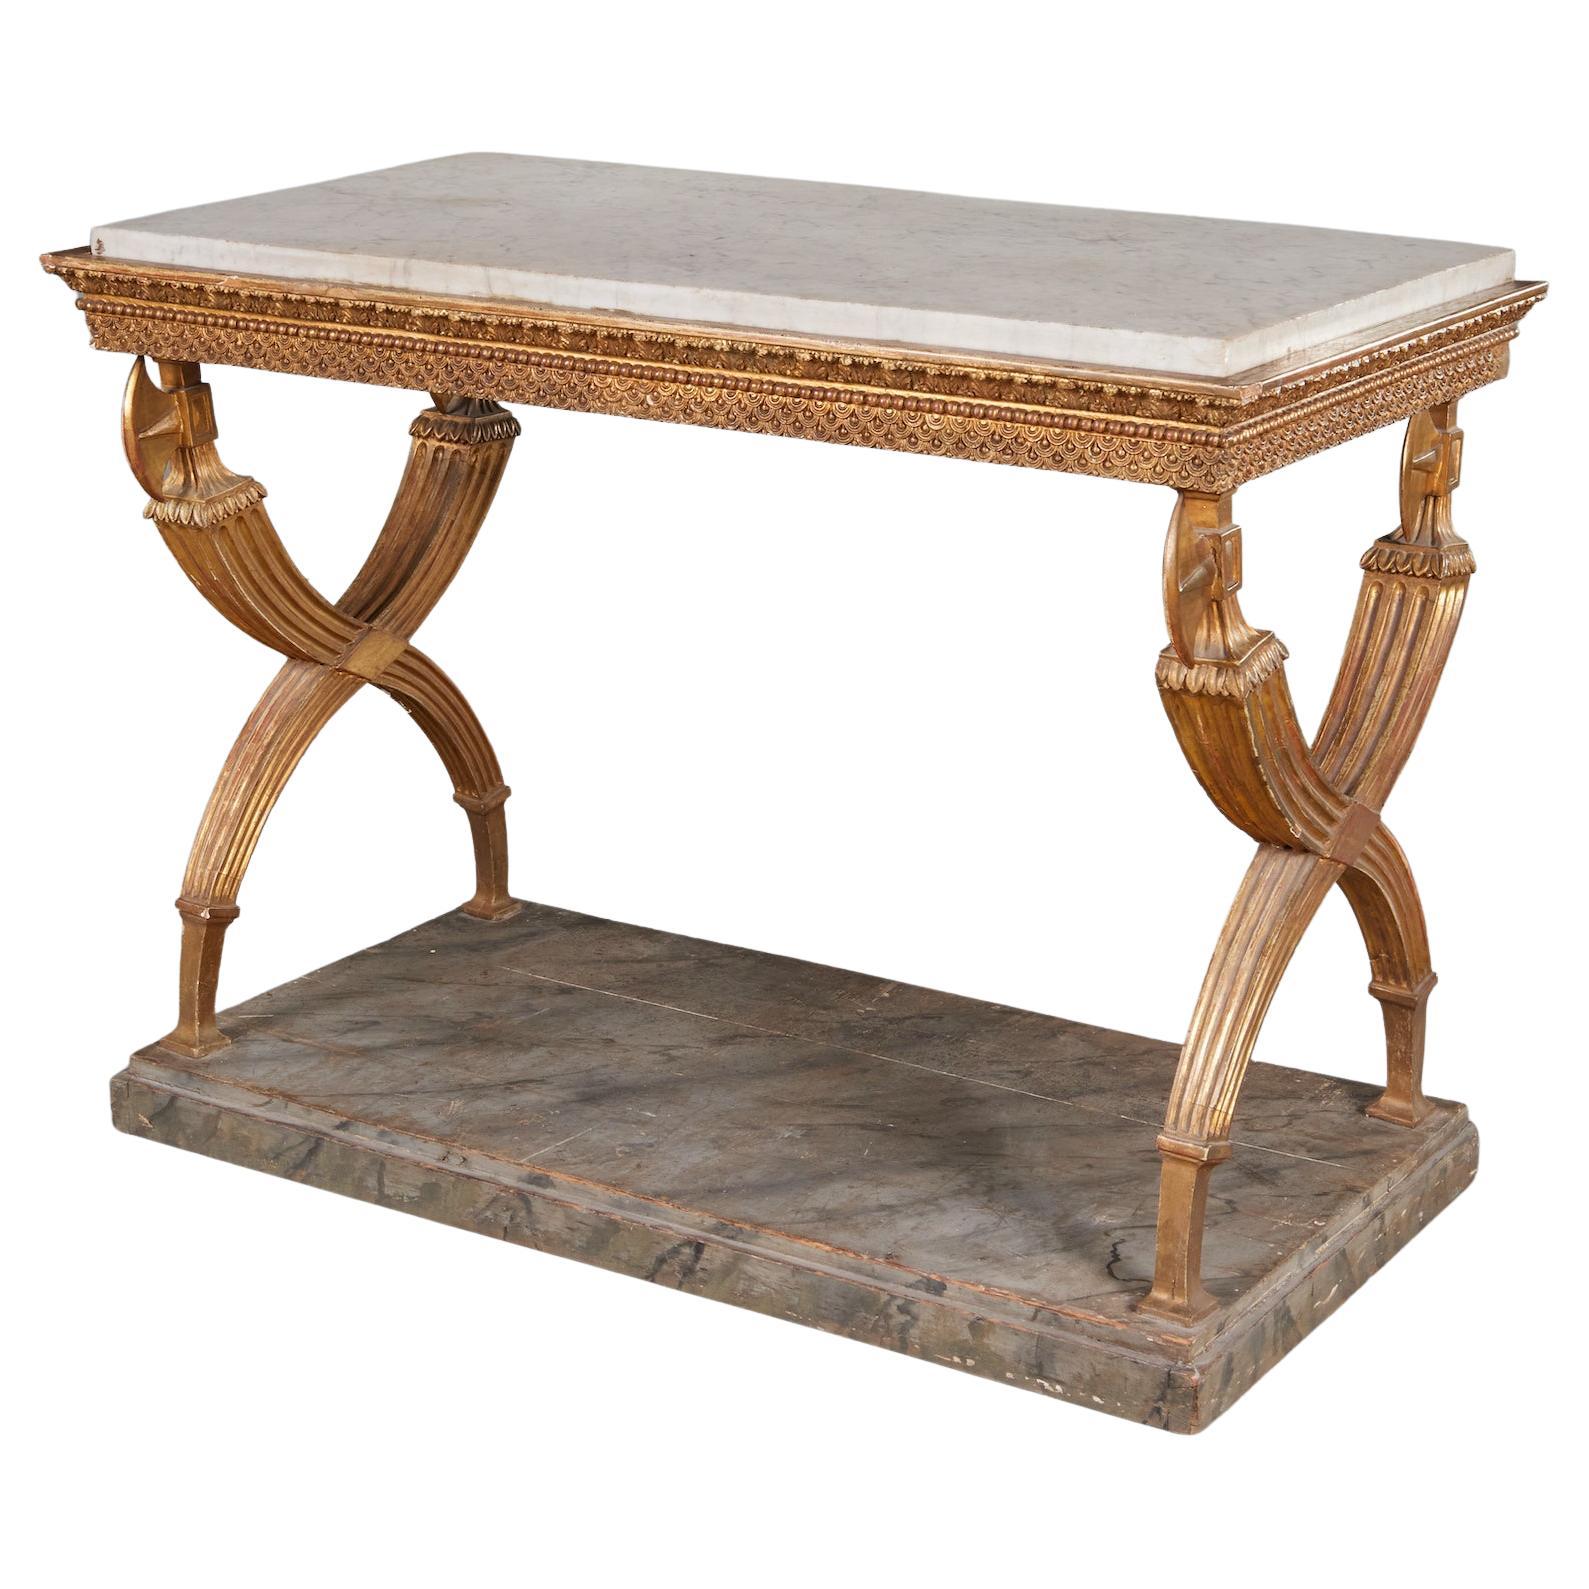 Elegant Swedish Gilt Wood Neoclassical Console Table with Marble Top For Sale